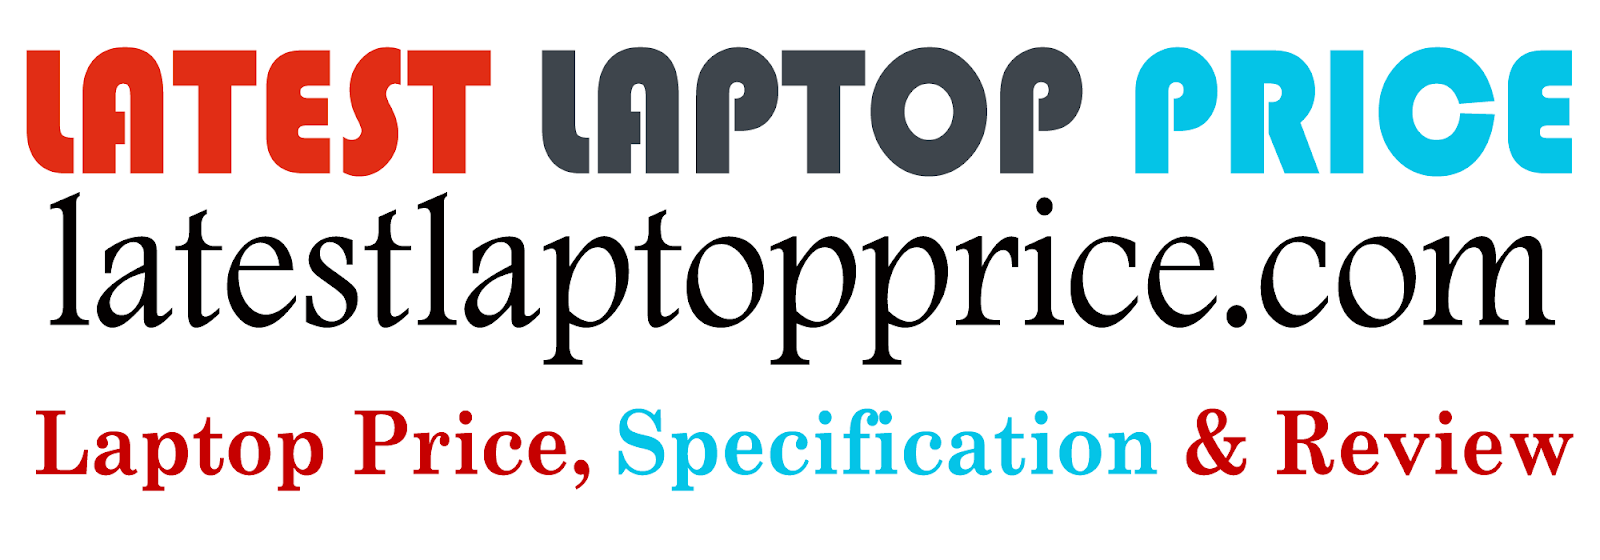 Latest laptop price ~ laptop specifications and reviews